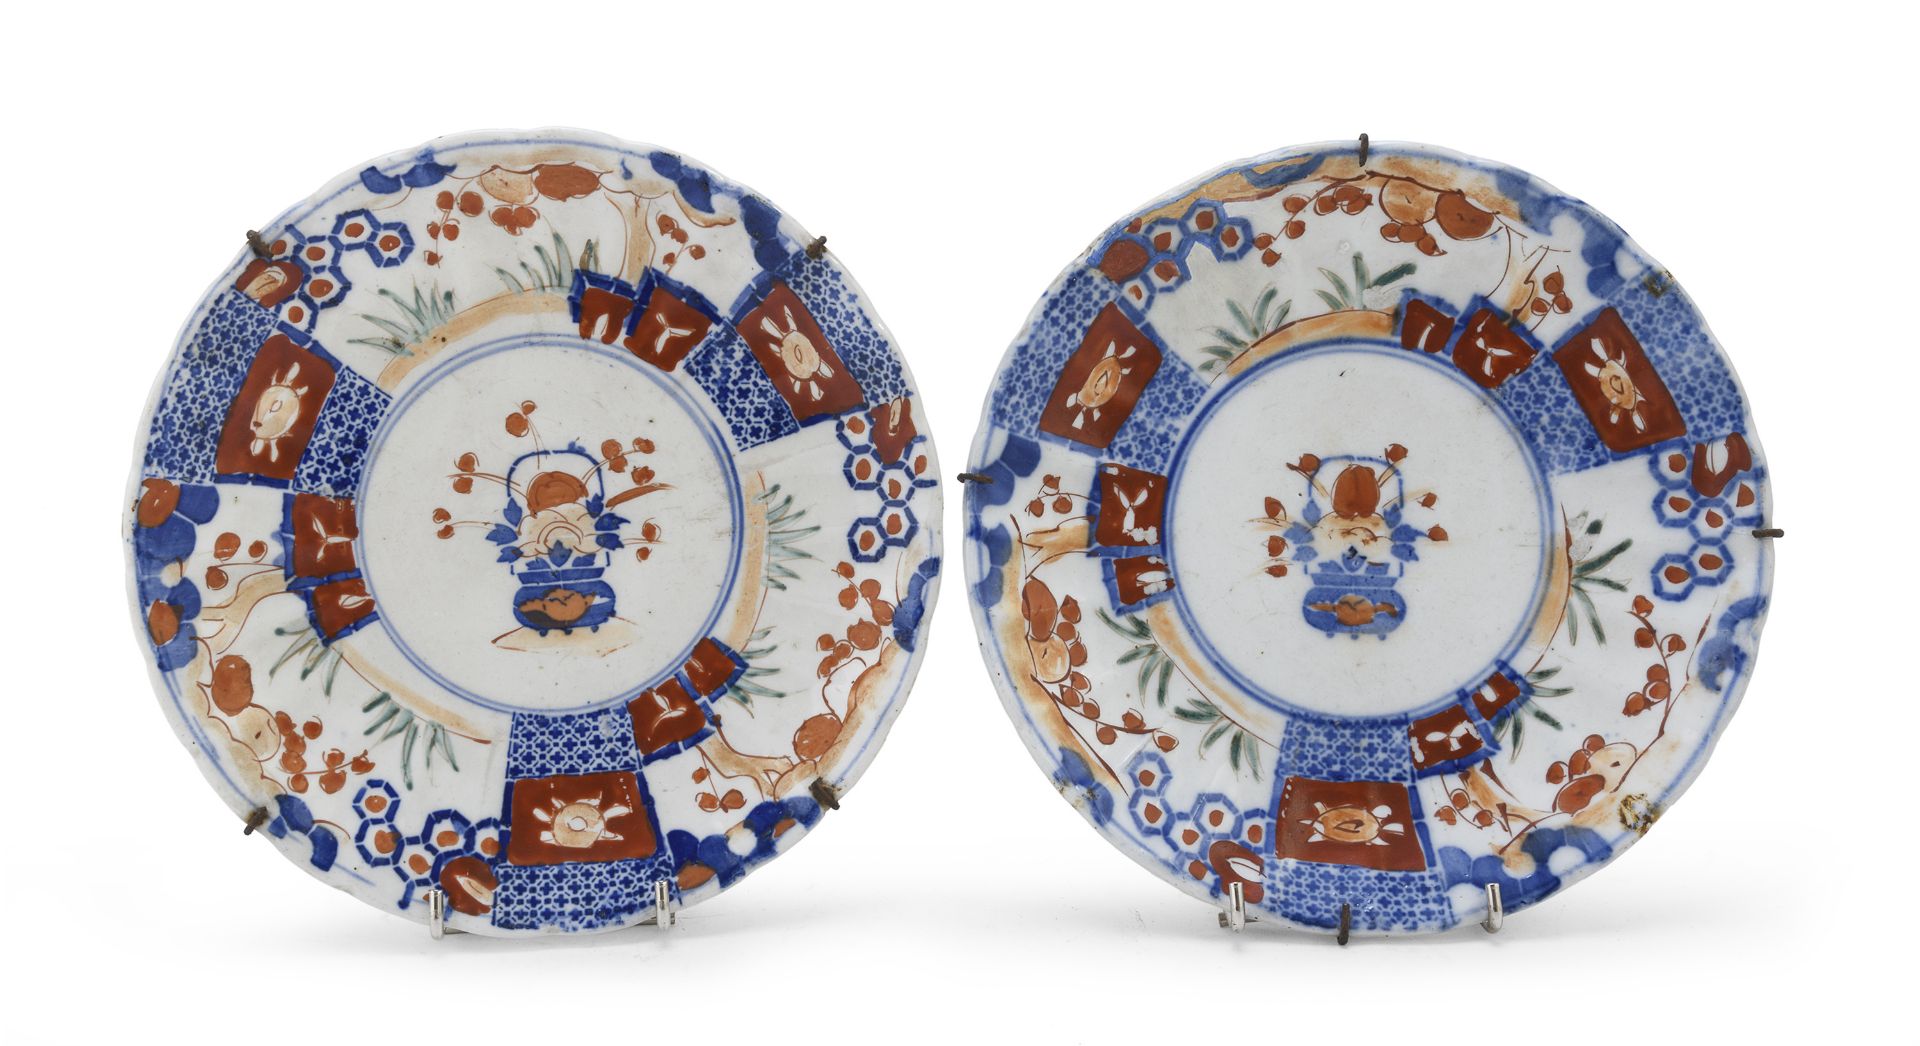 A PAIR OF PORCELAIN ENAMELED DISHES JAPAN LATE 19TH CENTURY